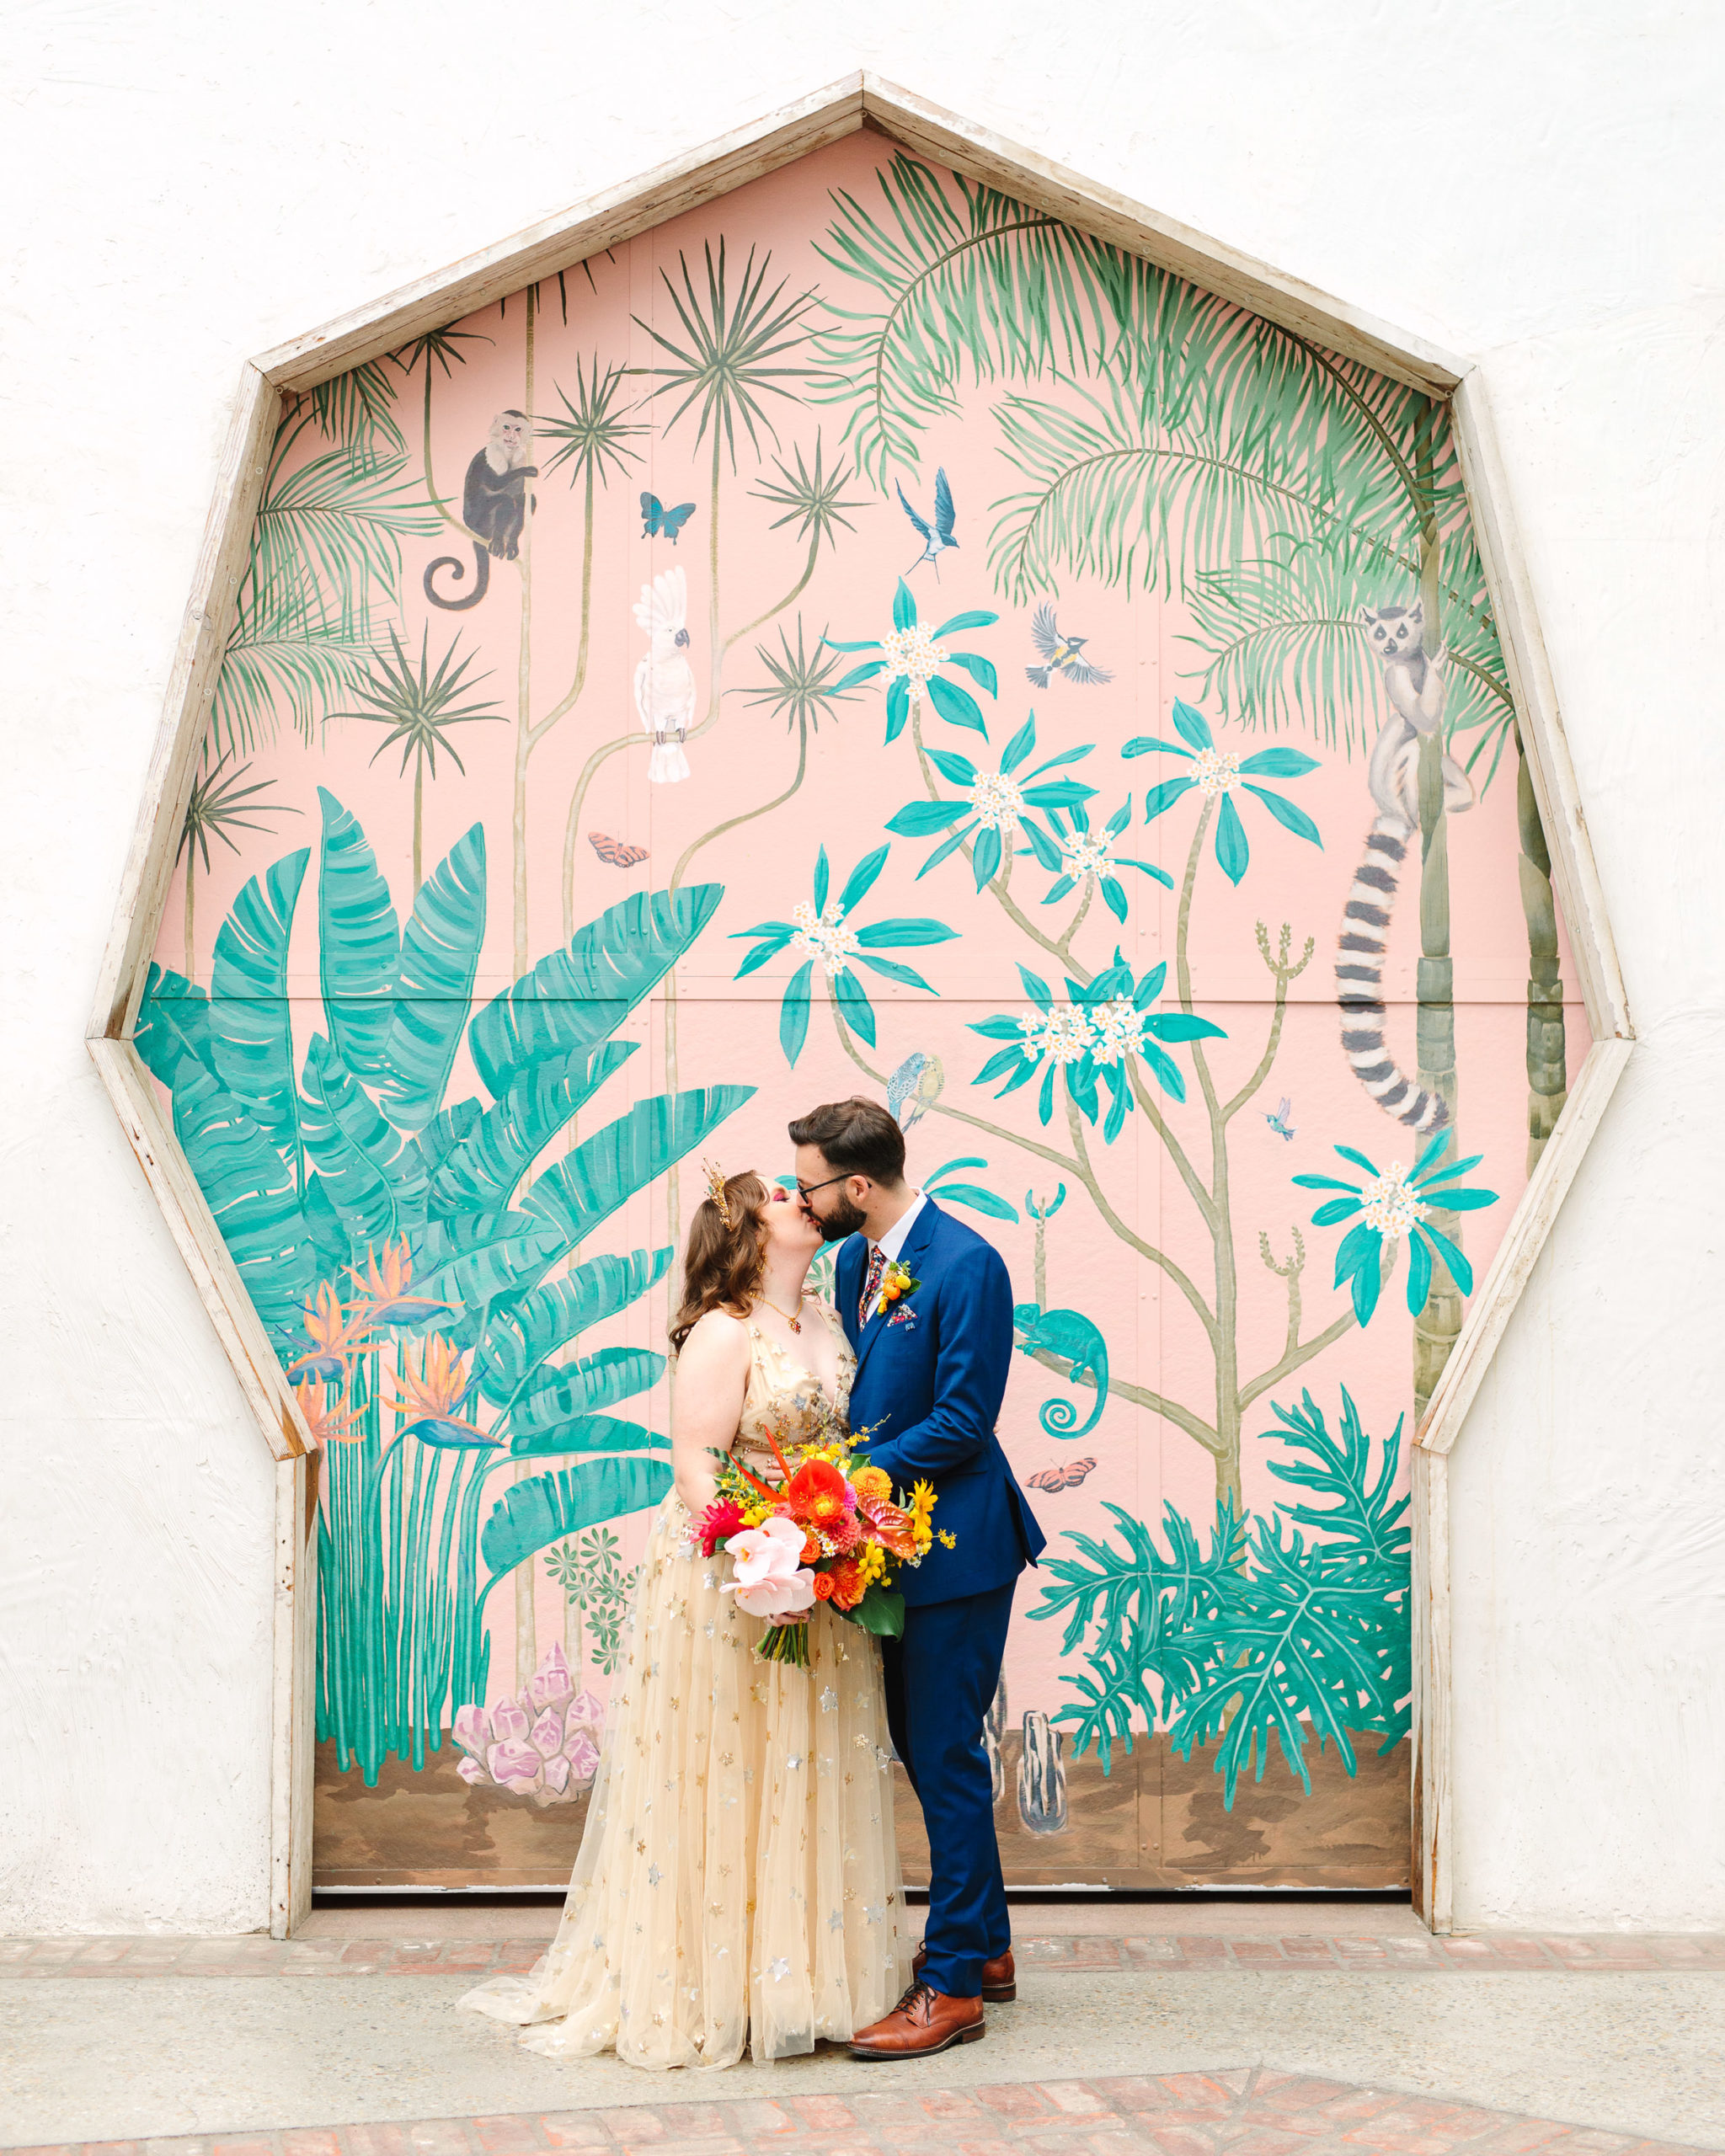 Bride and groom kissing at mural | Colorful Downtown Los Angeles Valentine Wedding | Los Angeles wedding photographer | #losangeleswedding #colorfulwedding #DTLA #valentinedtla   Source: Mary Costa Photography | Los Angeles